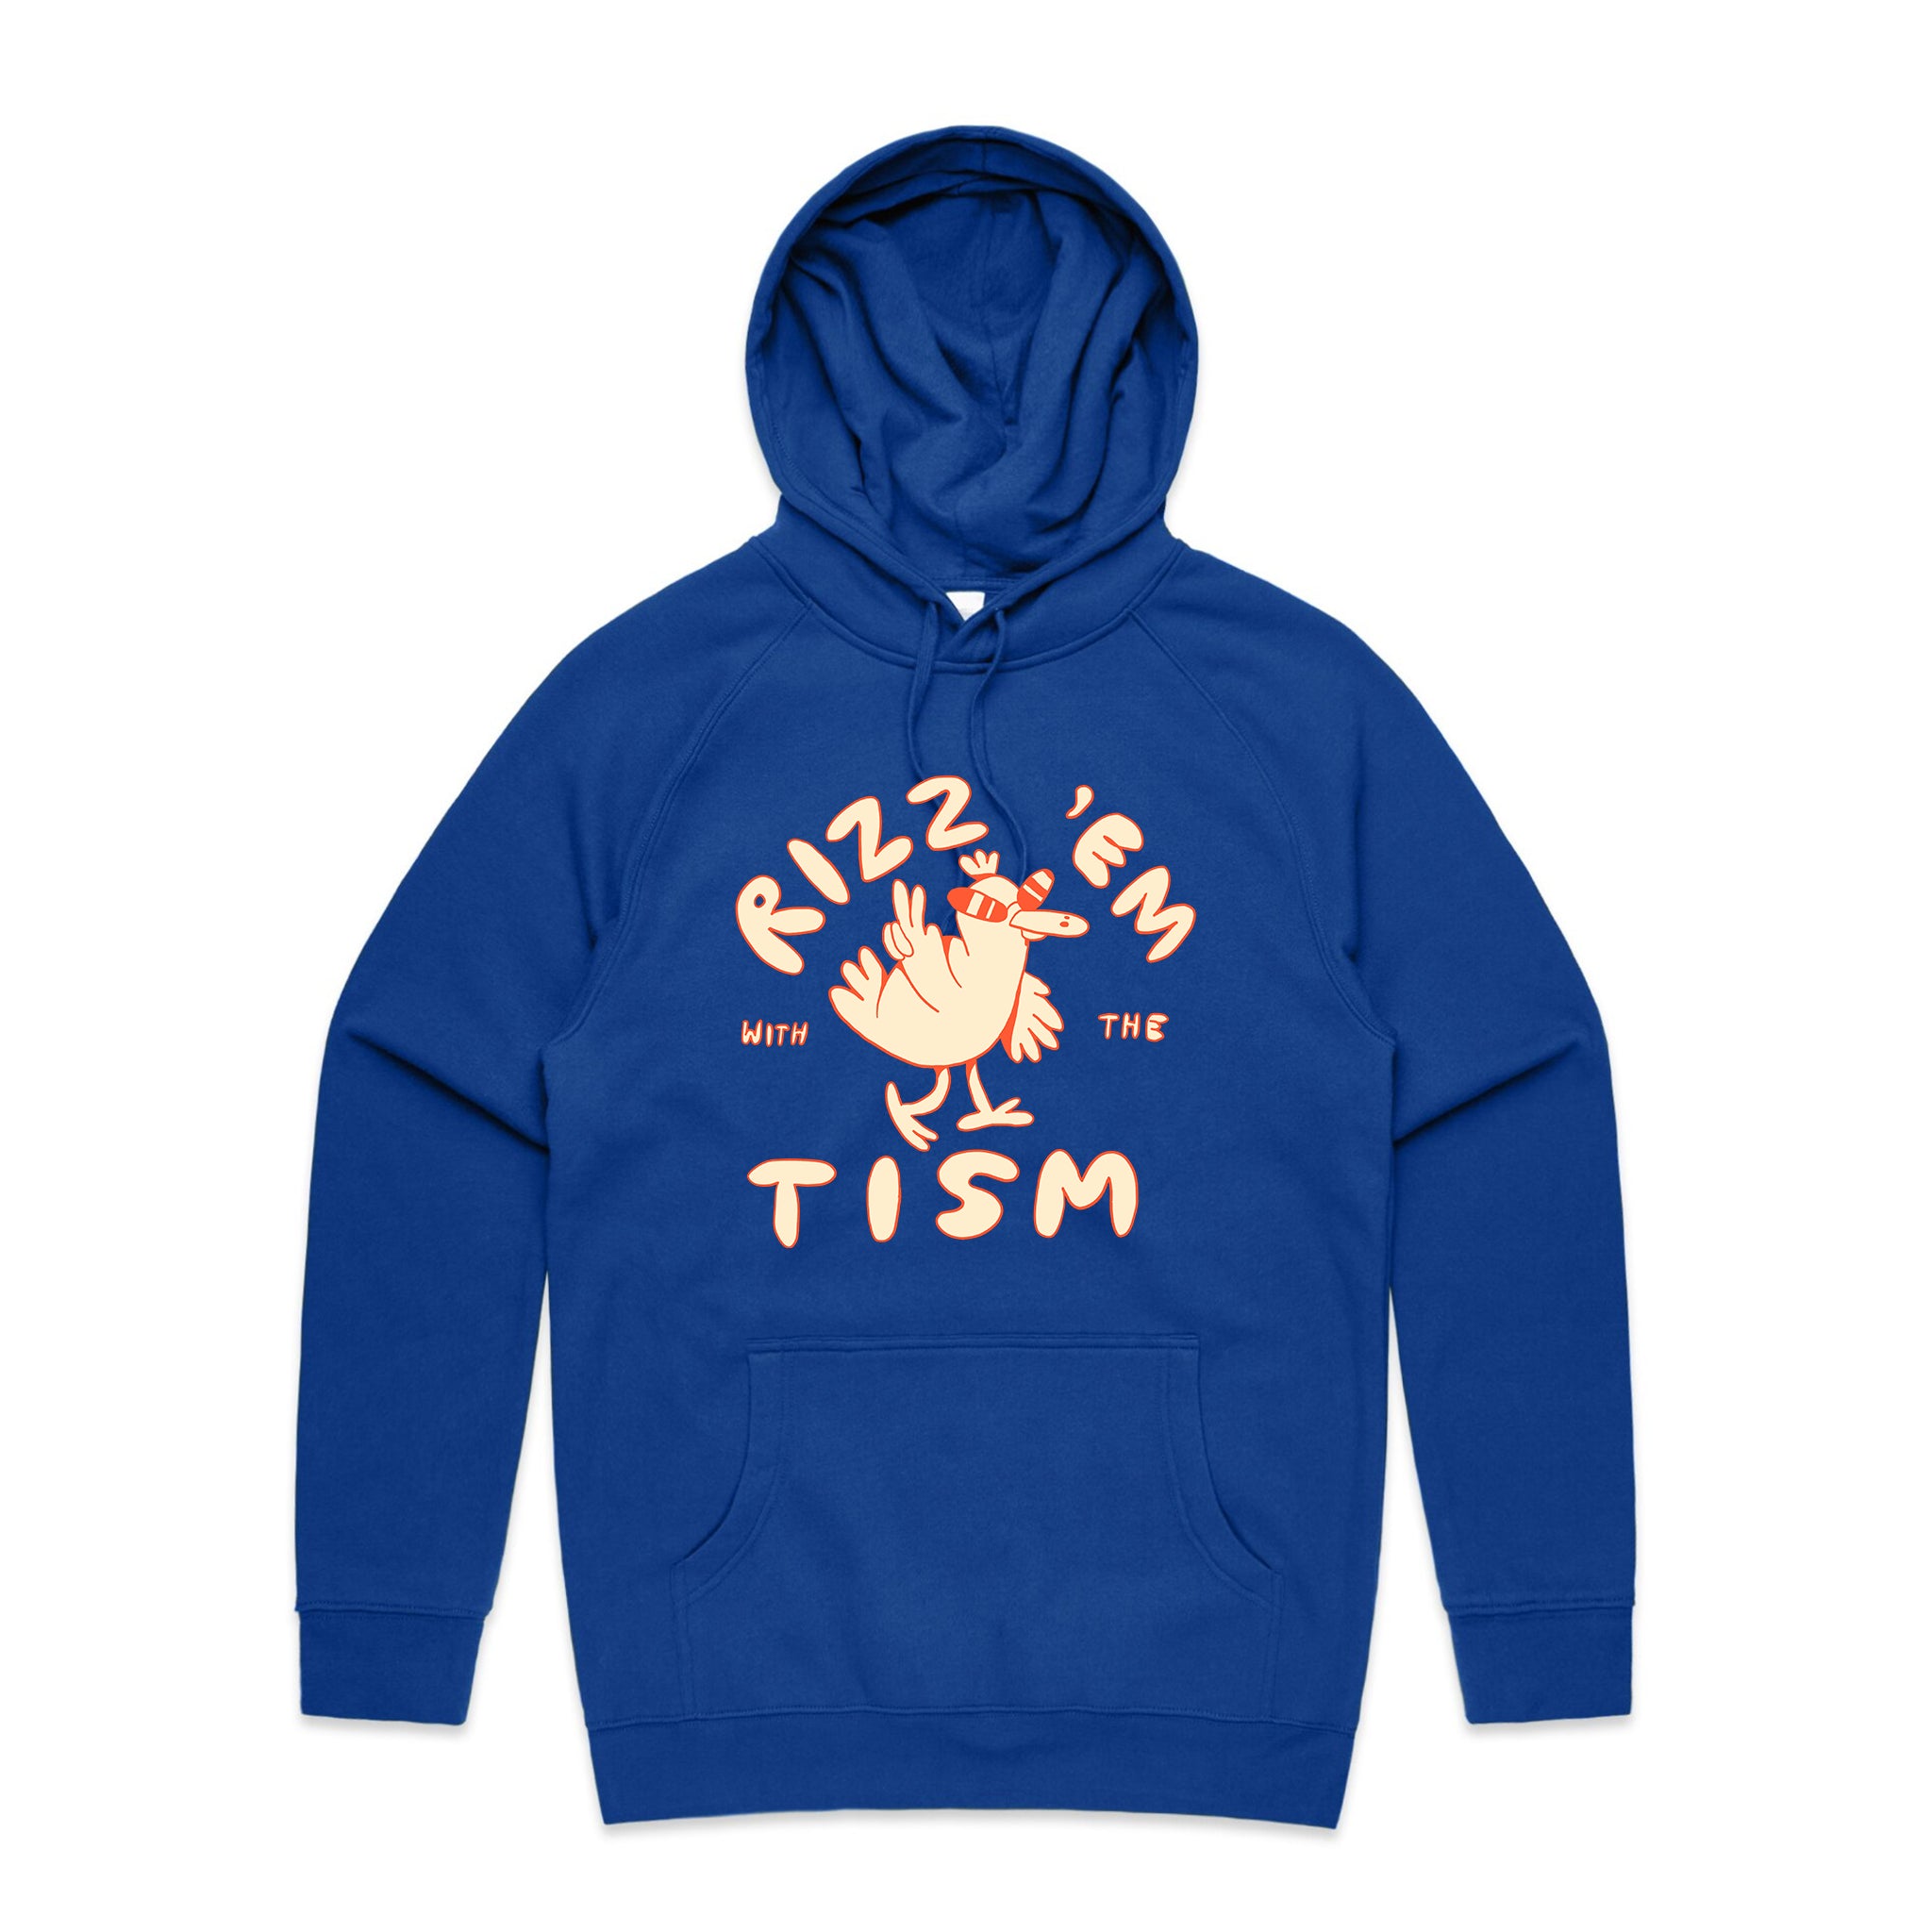 Rizz 'Em With The 'Tism Hoodie